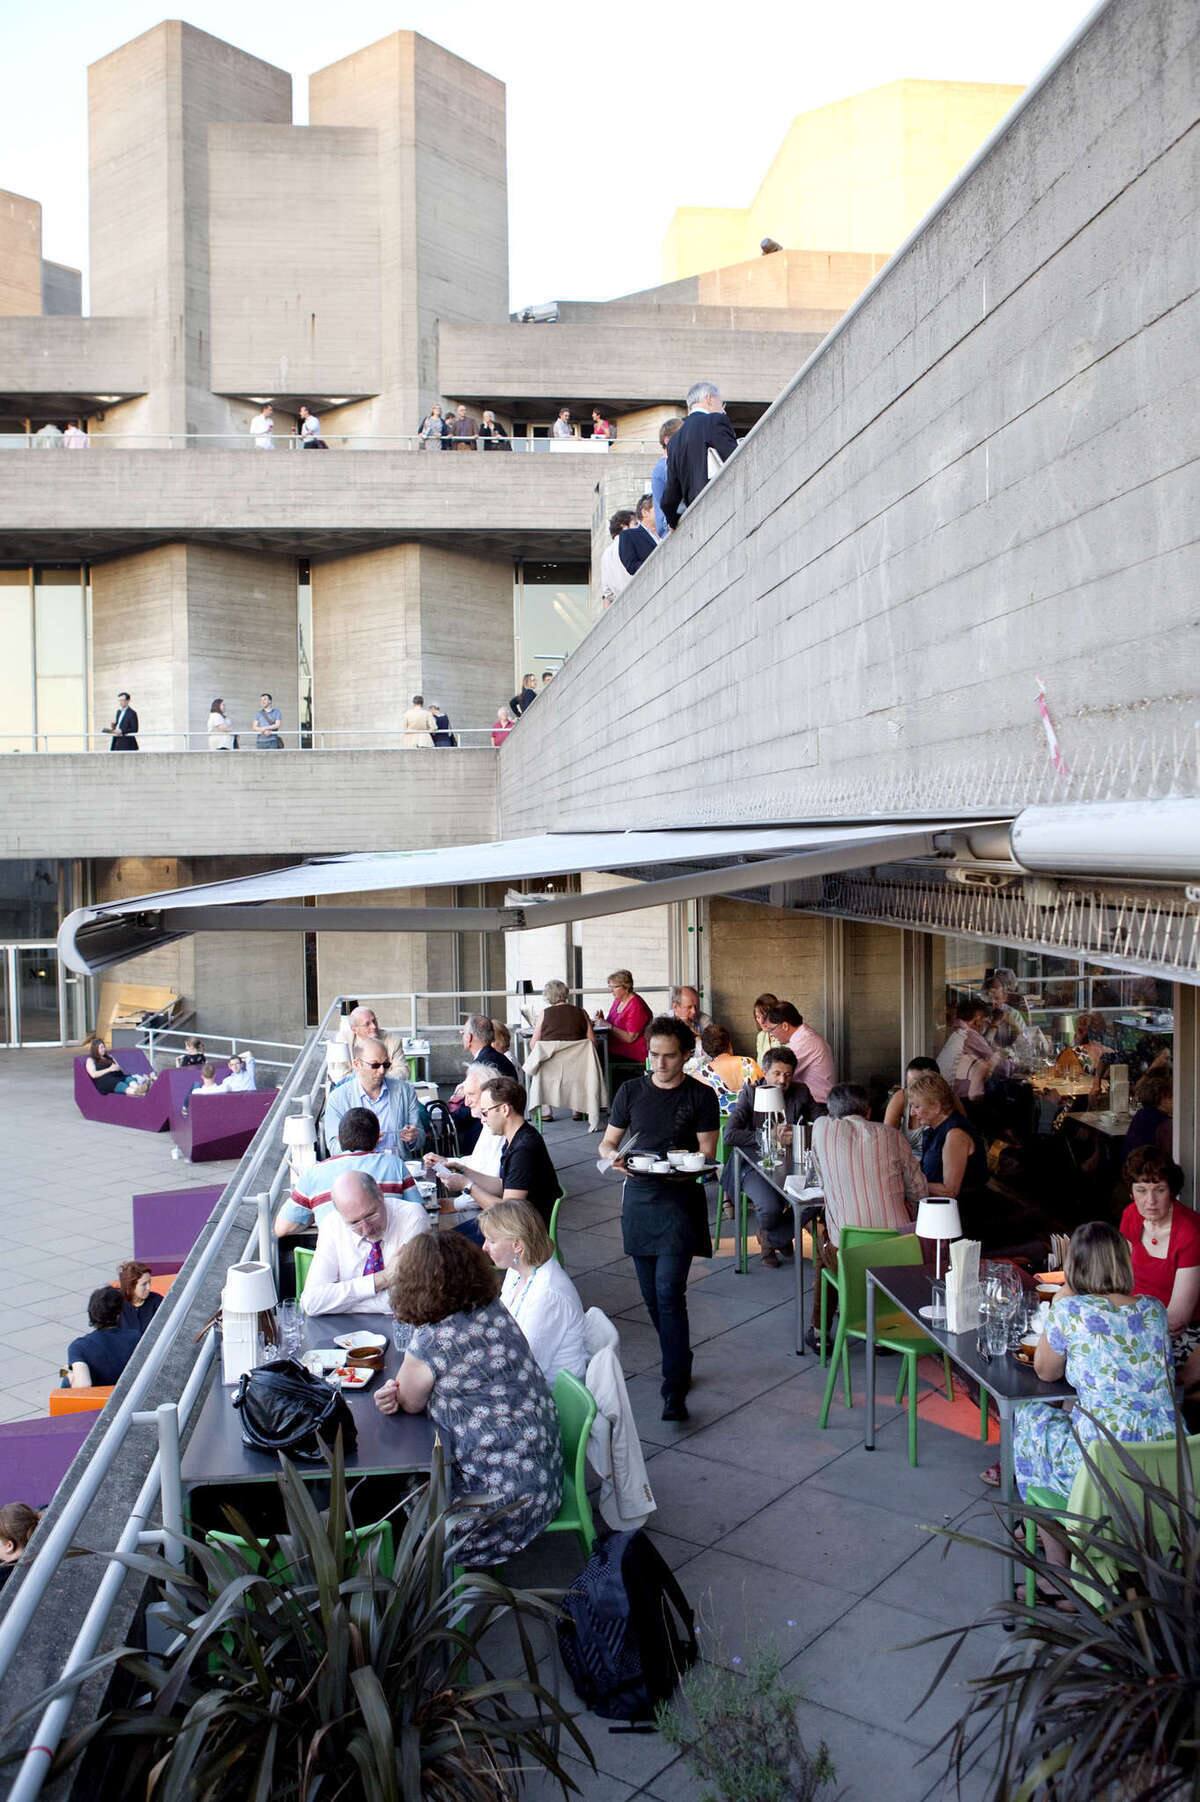 The Terrace at The National Theatre